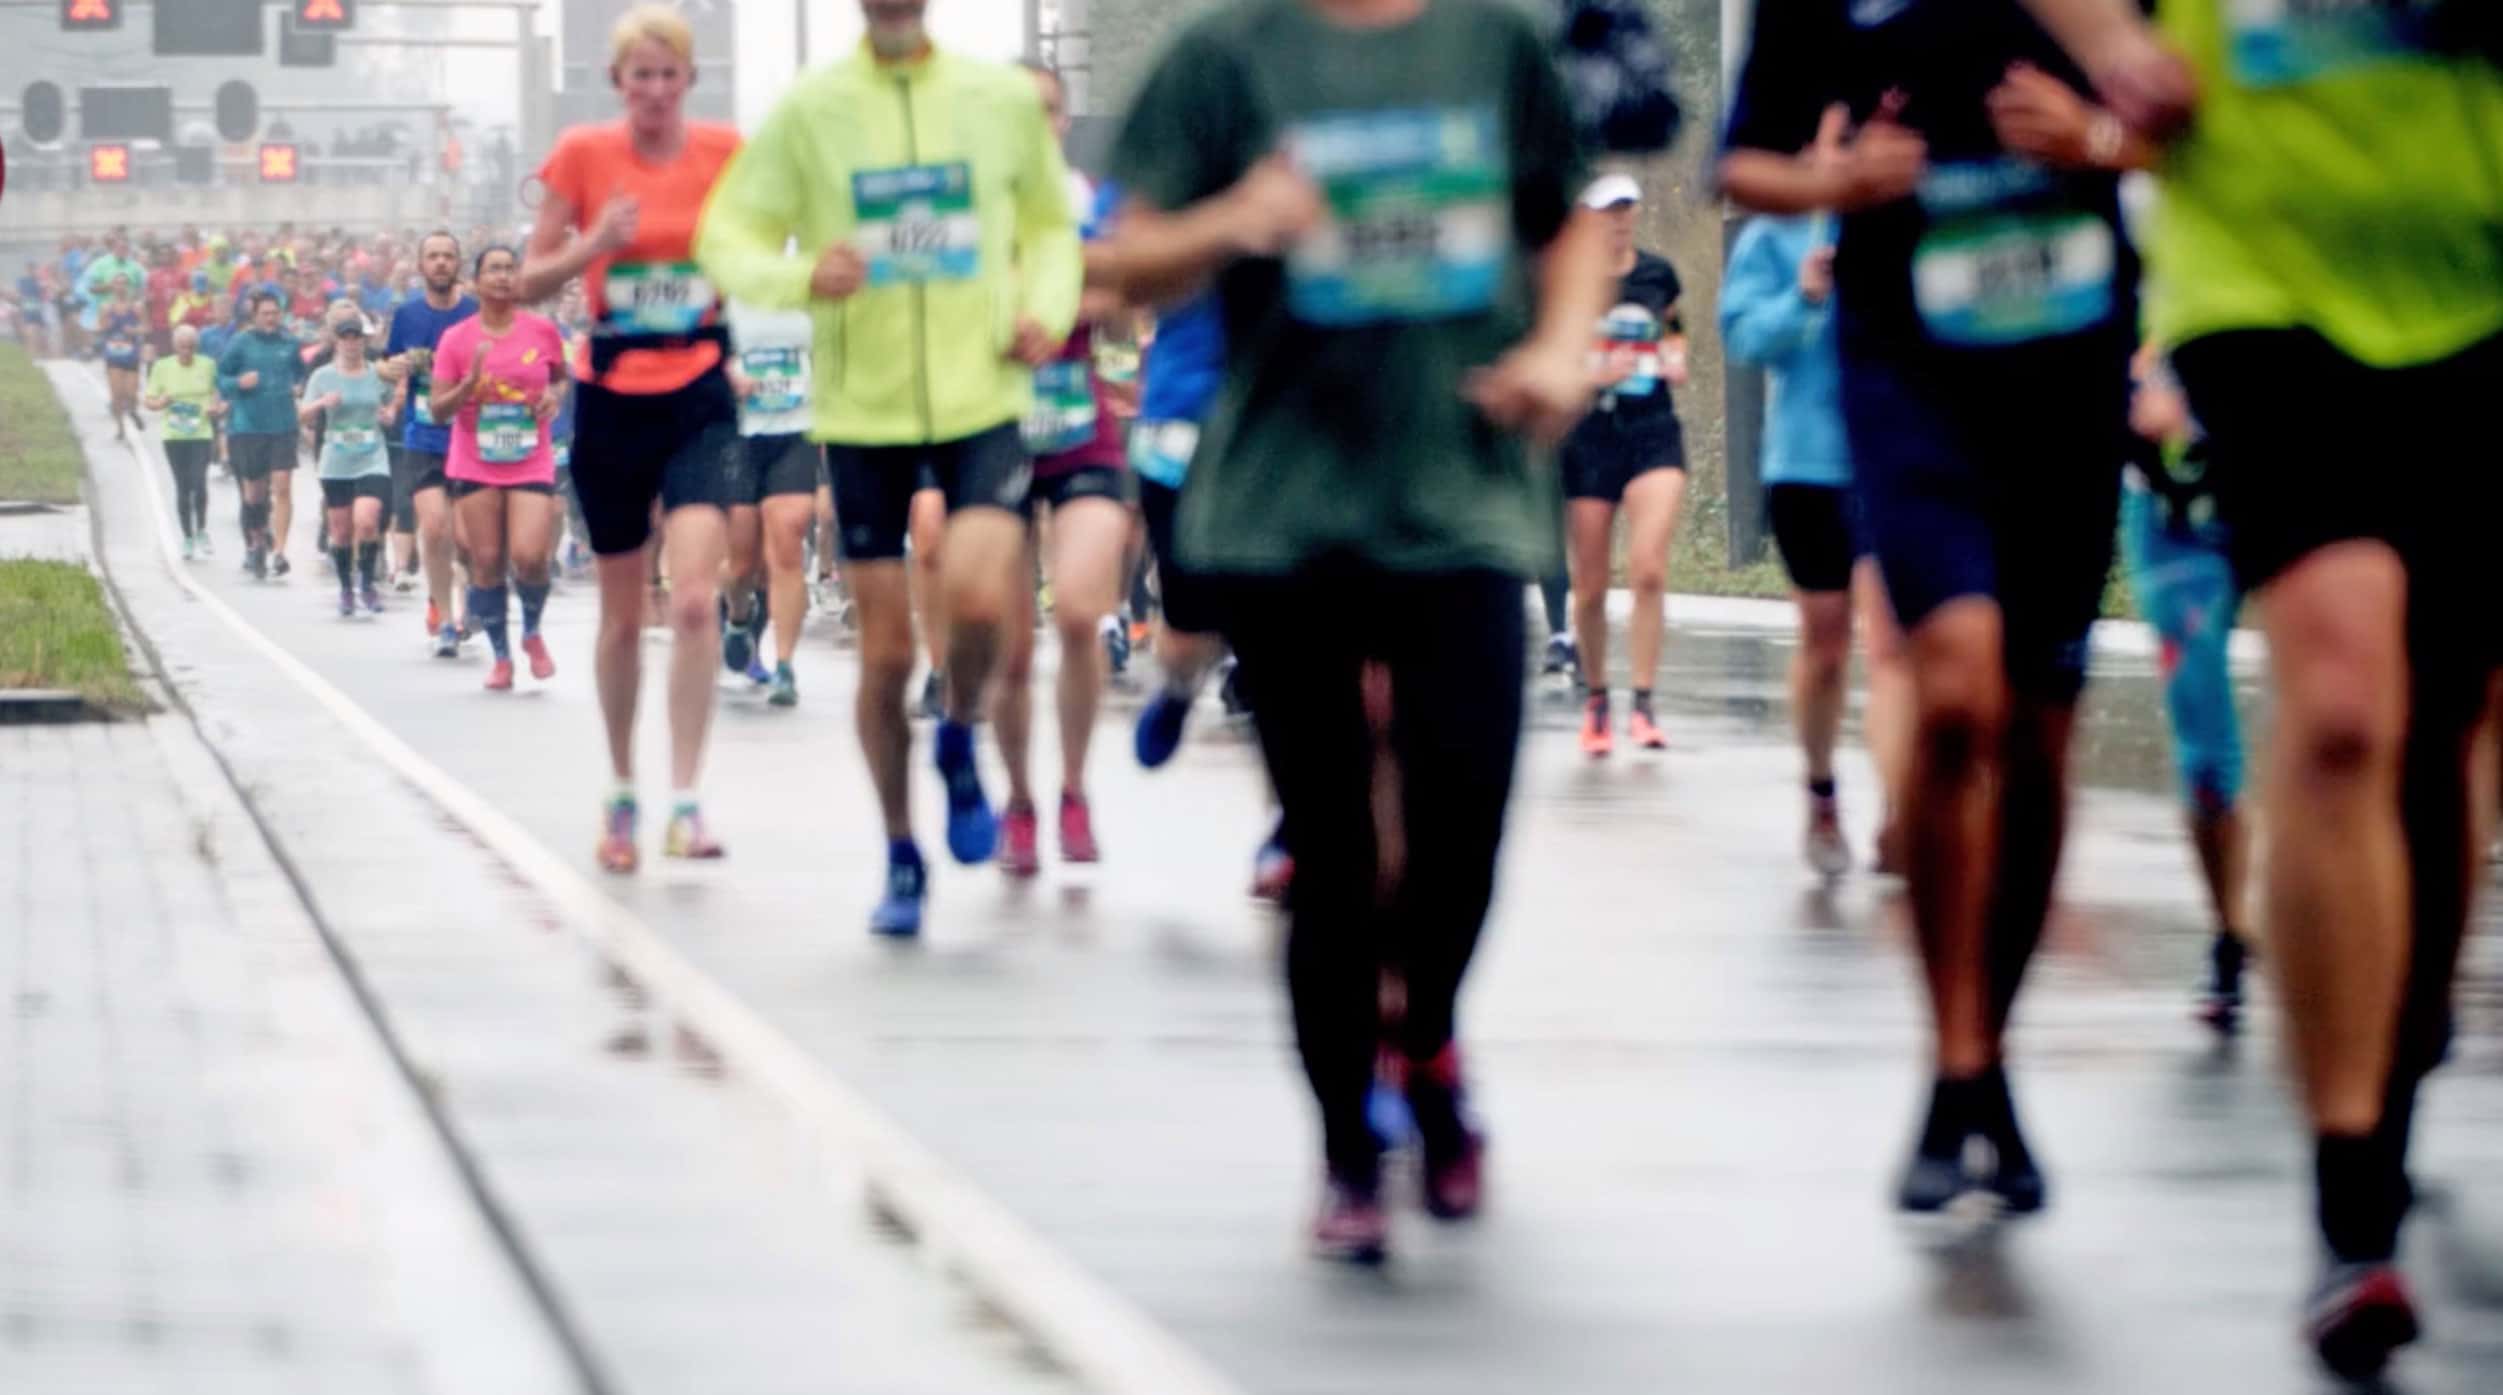 Photo of runners in a marathon.